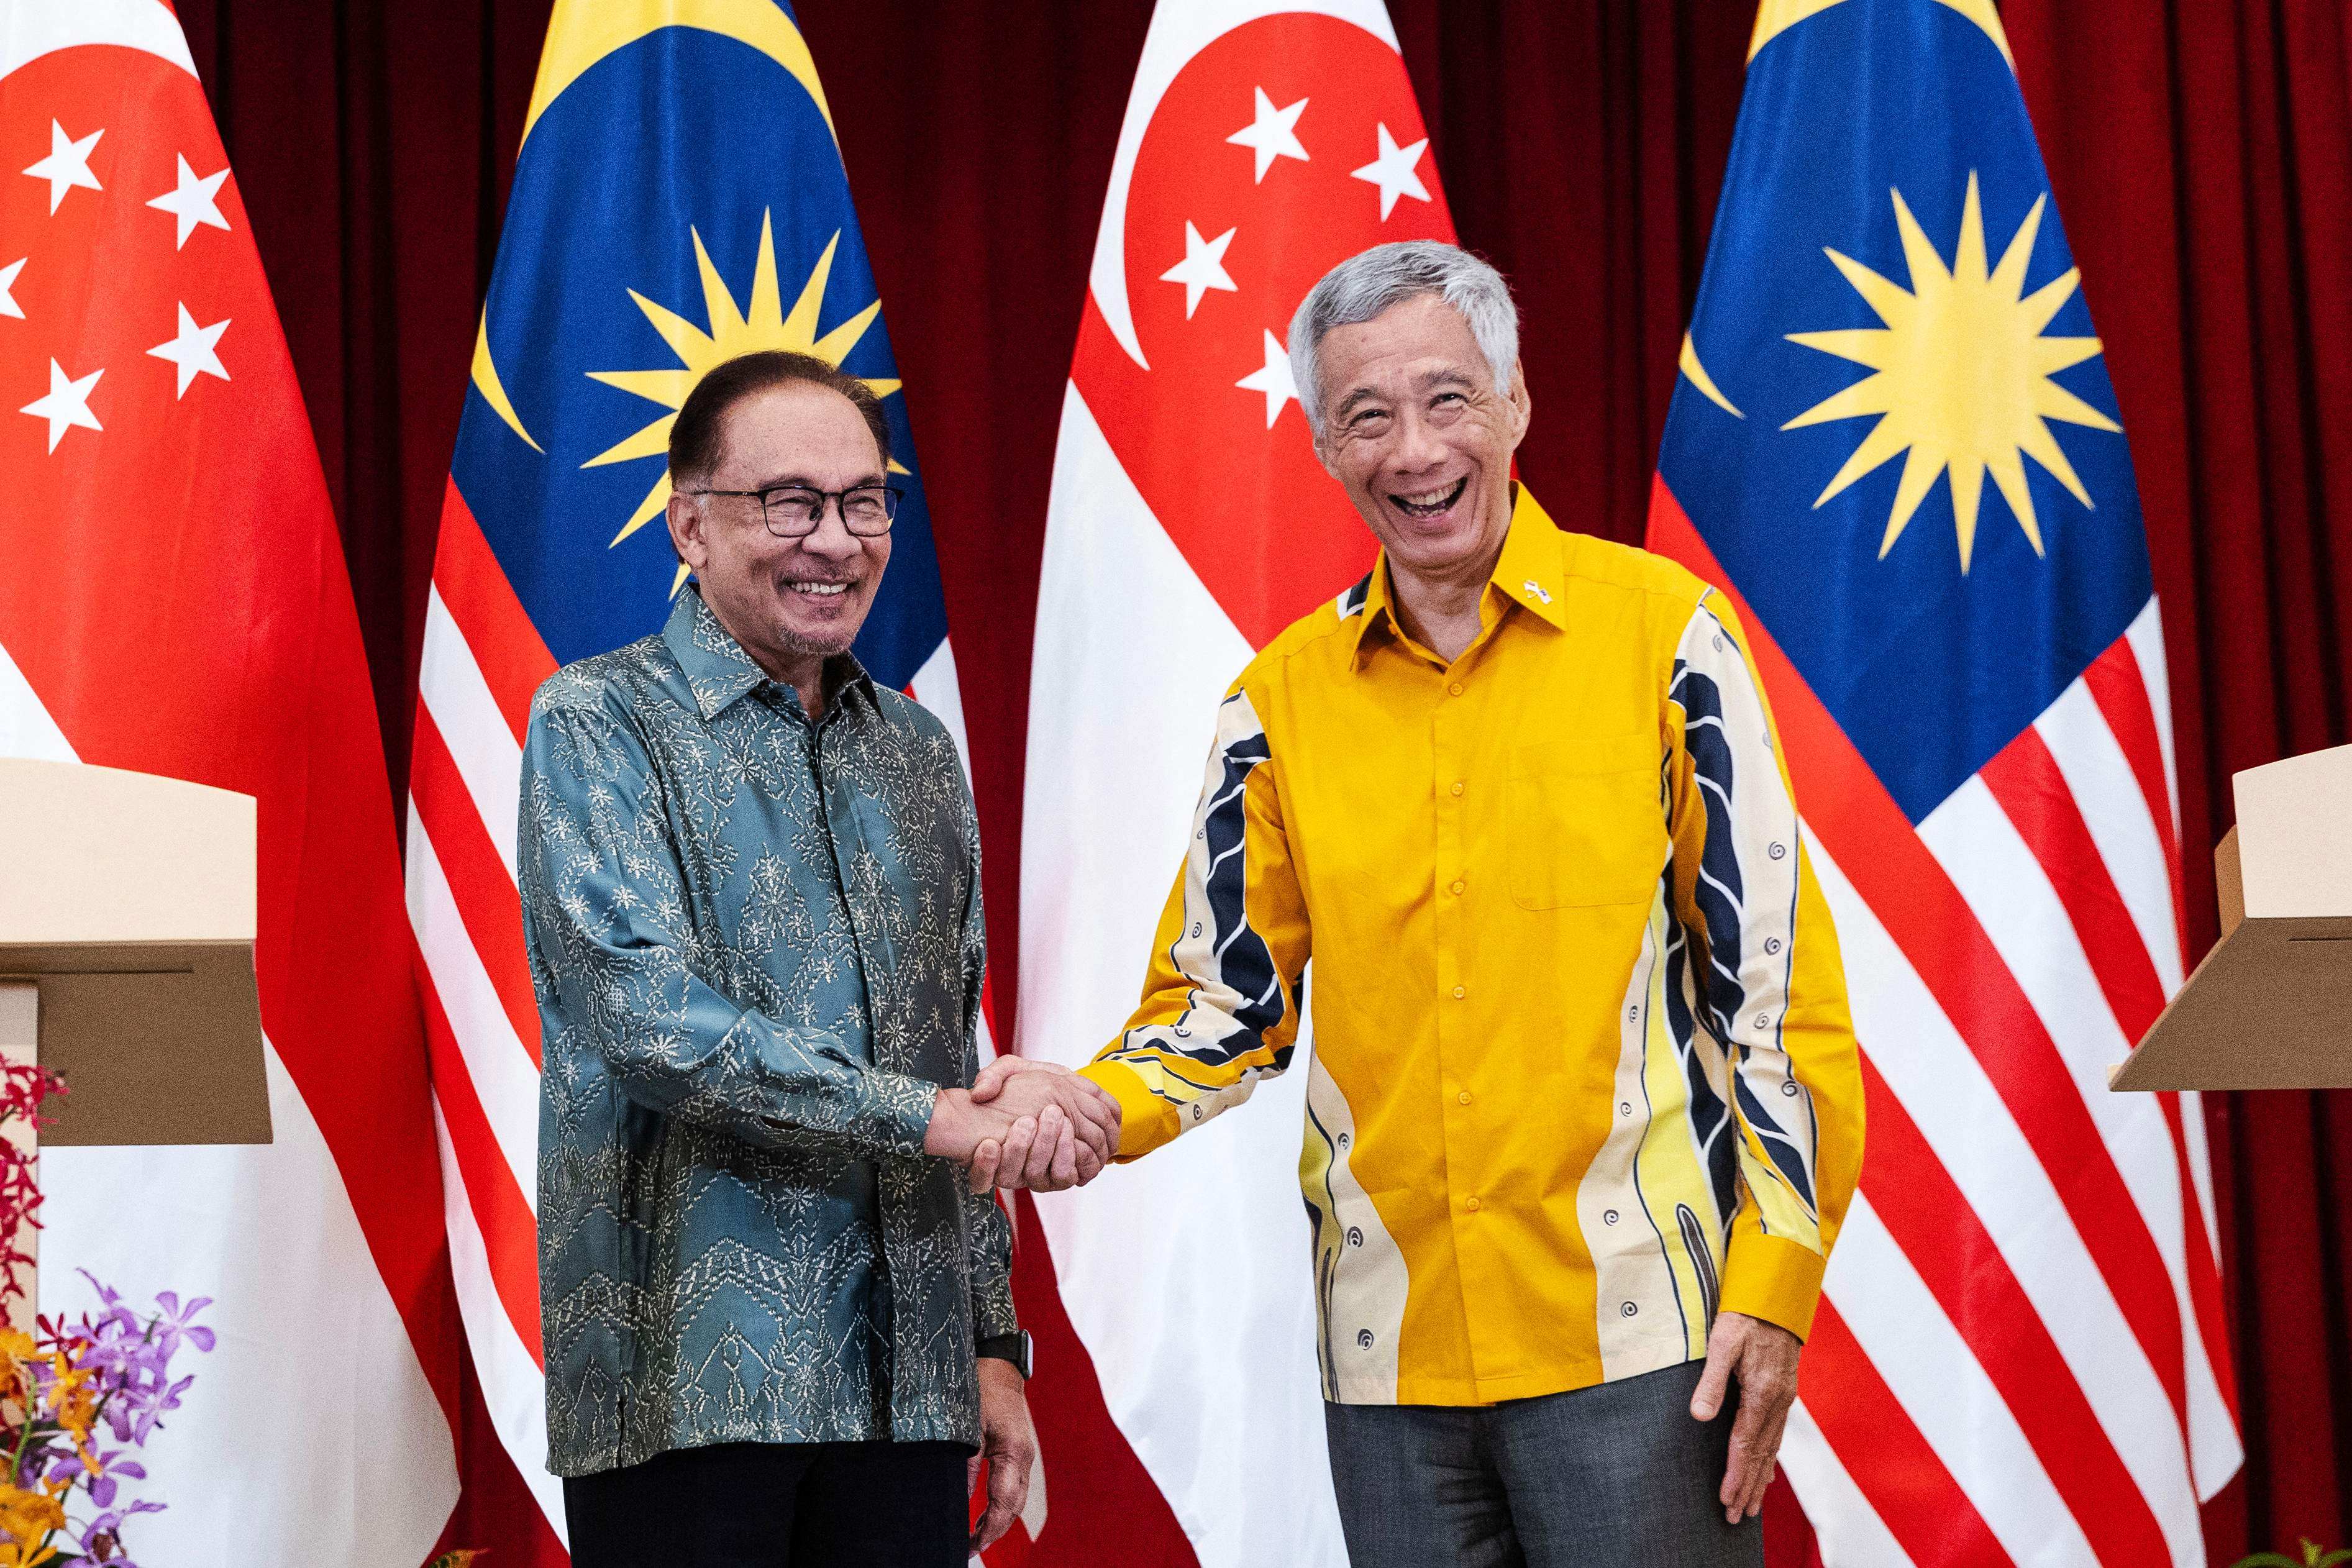 Malaysia’s Prime Minister Anwar Ibrahim (left) shakes hands with Singapore’s Prime Minister Lee Hsien Loong after a joint press conference at the Istana in Singapore on Monday. Photo: Pool/AFP